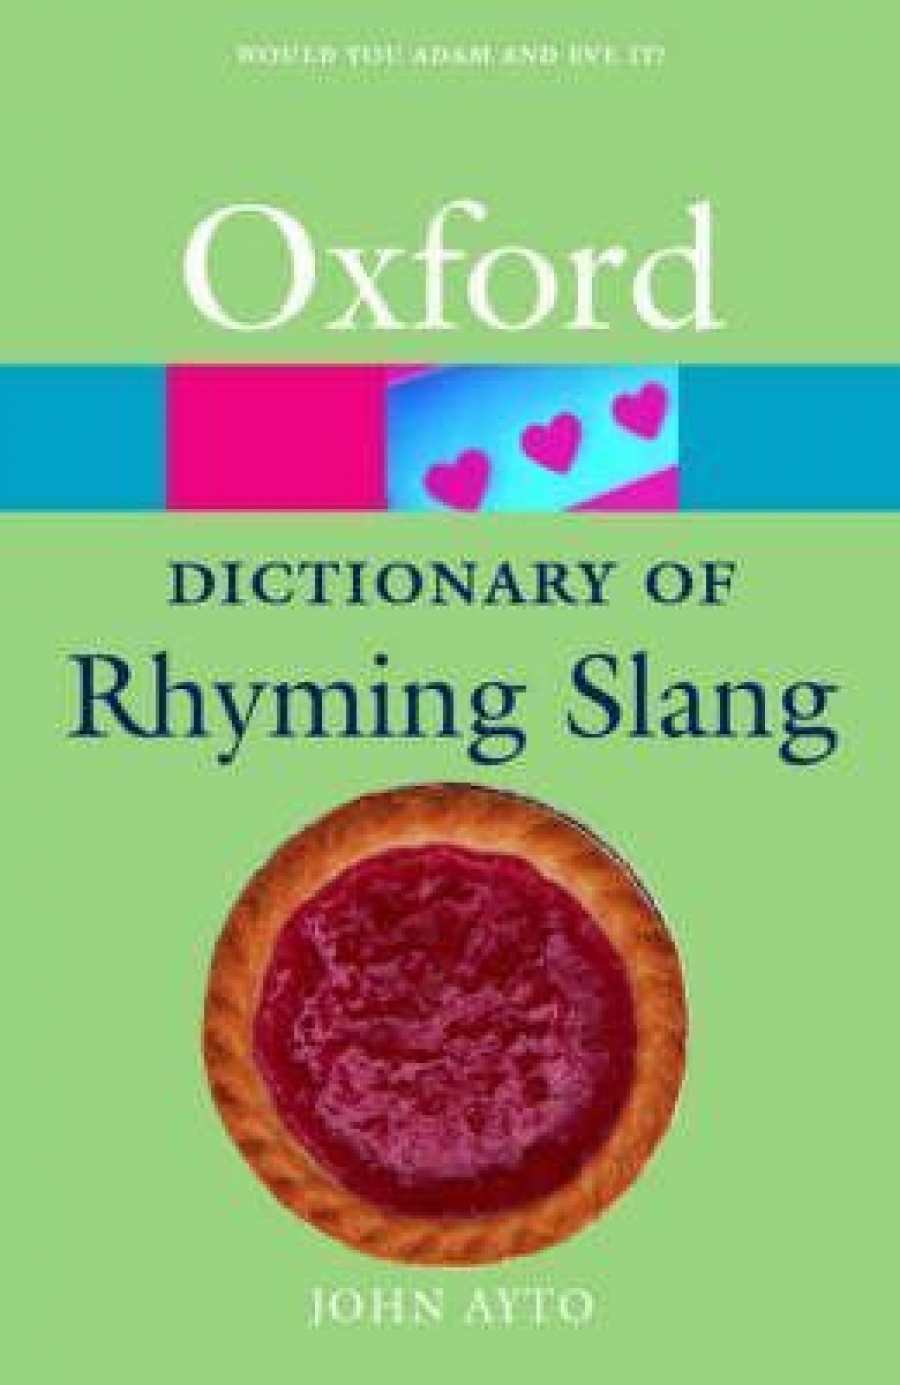 John Ayto The Oxford Dictionary of Rhyming Slang (Oxford Paperback Reference) 